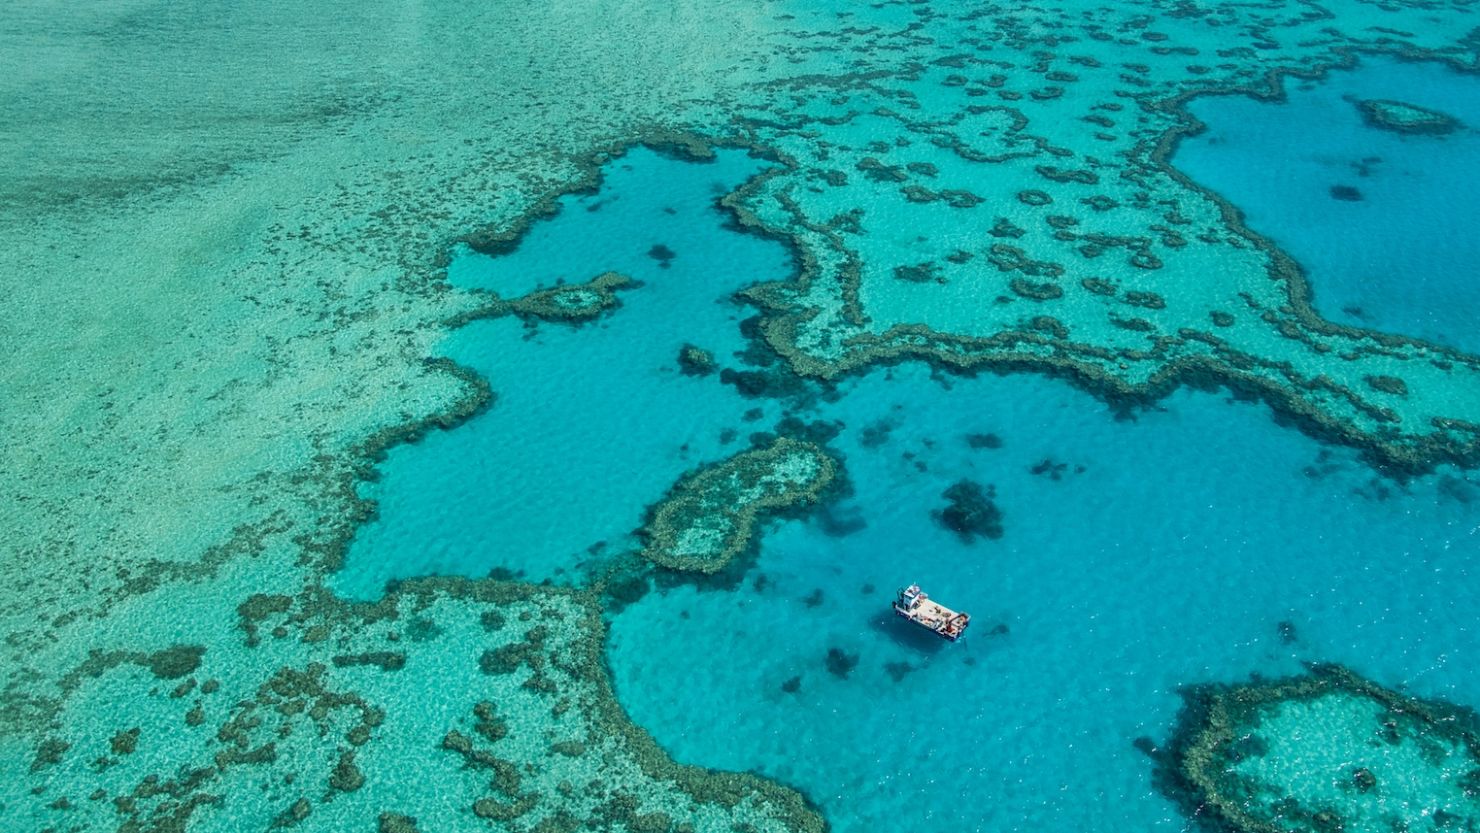 The Great Barrier Reef in Queensland has suffered several mass bleaching events due to the impacts of climate change.